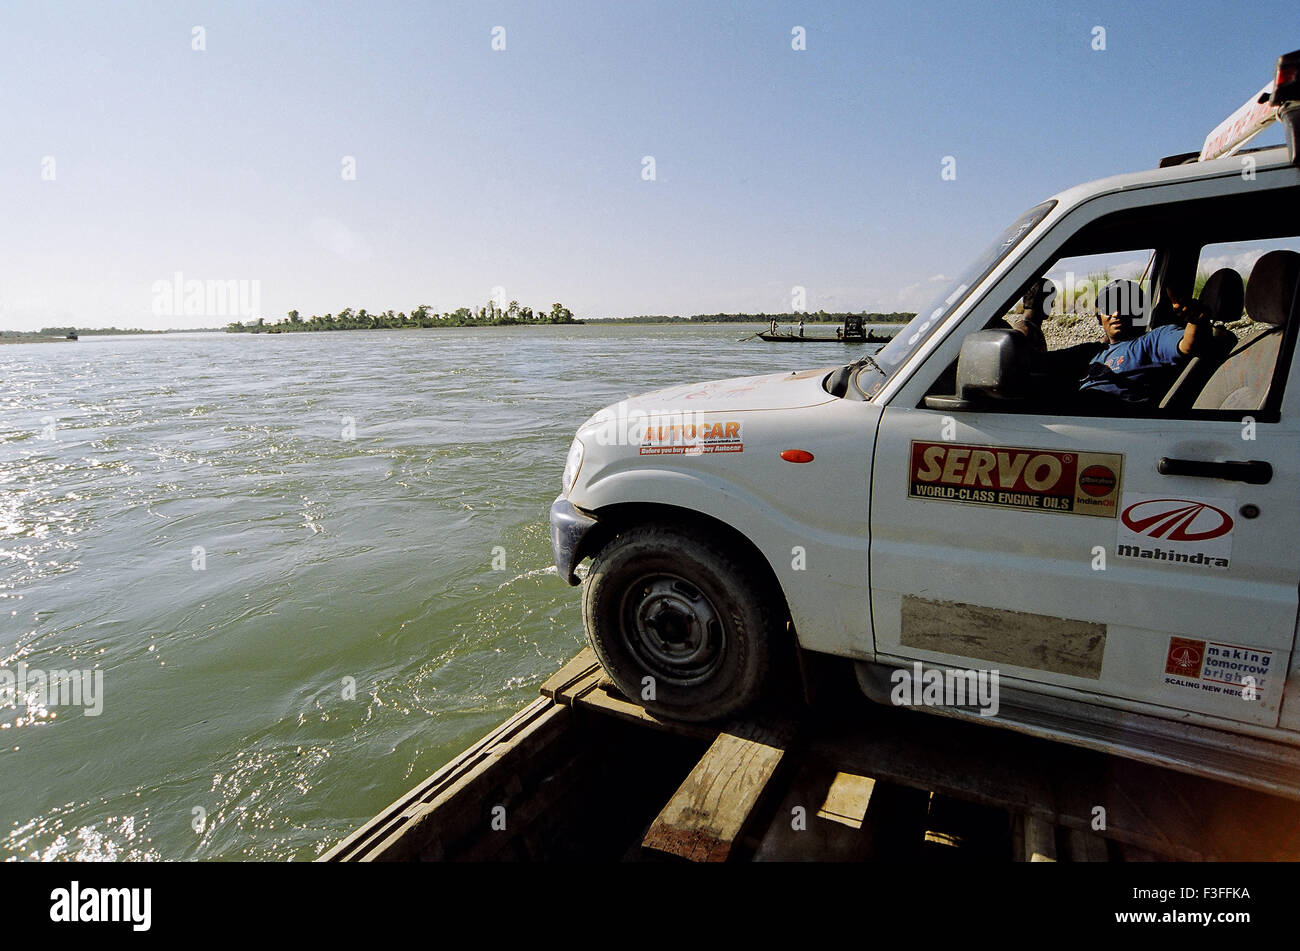 Car crossing river on boat ; India ; Asia ; Asian ; Indian Stock Photo